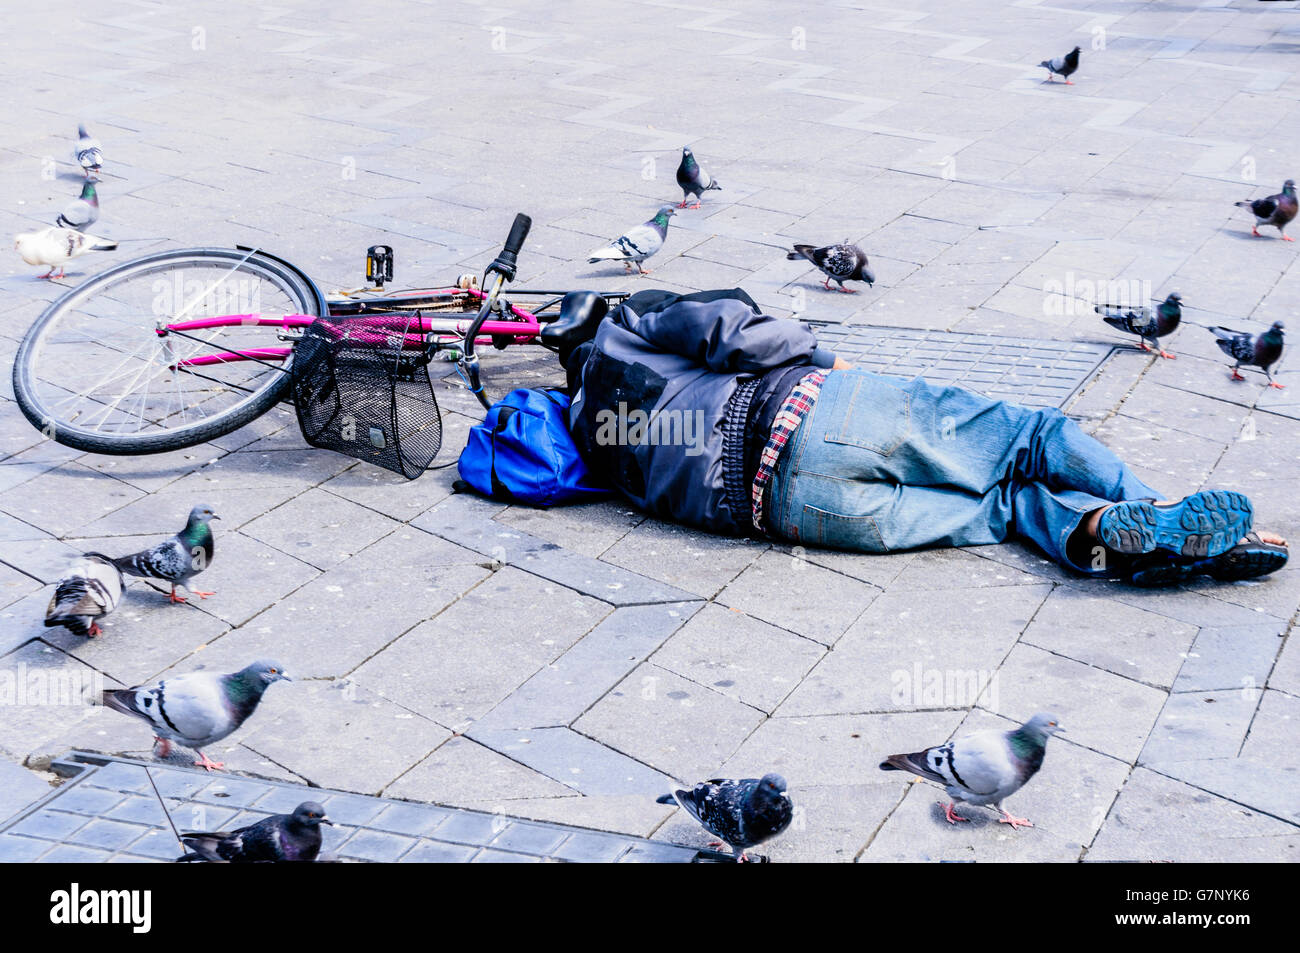 A drunk man sleeps in a public square beside his bicycle while pigeons walk around him. Stock Photo